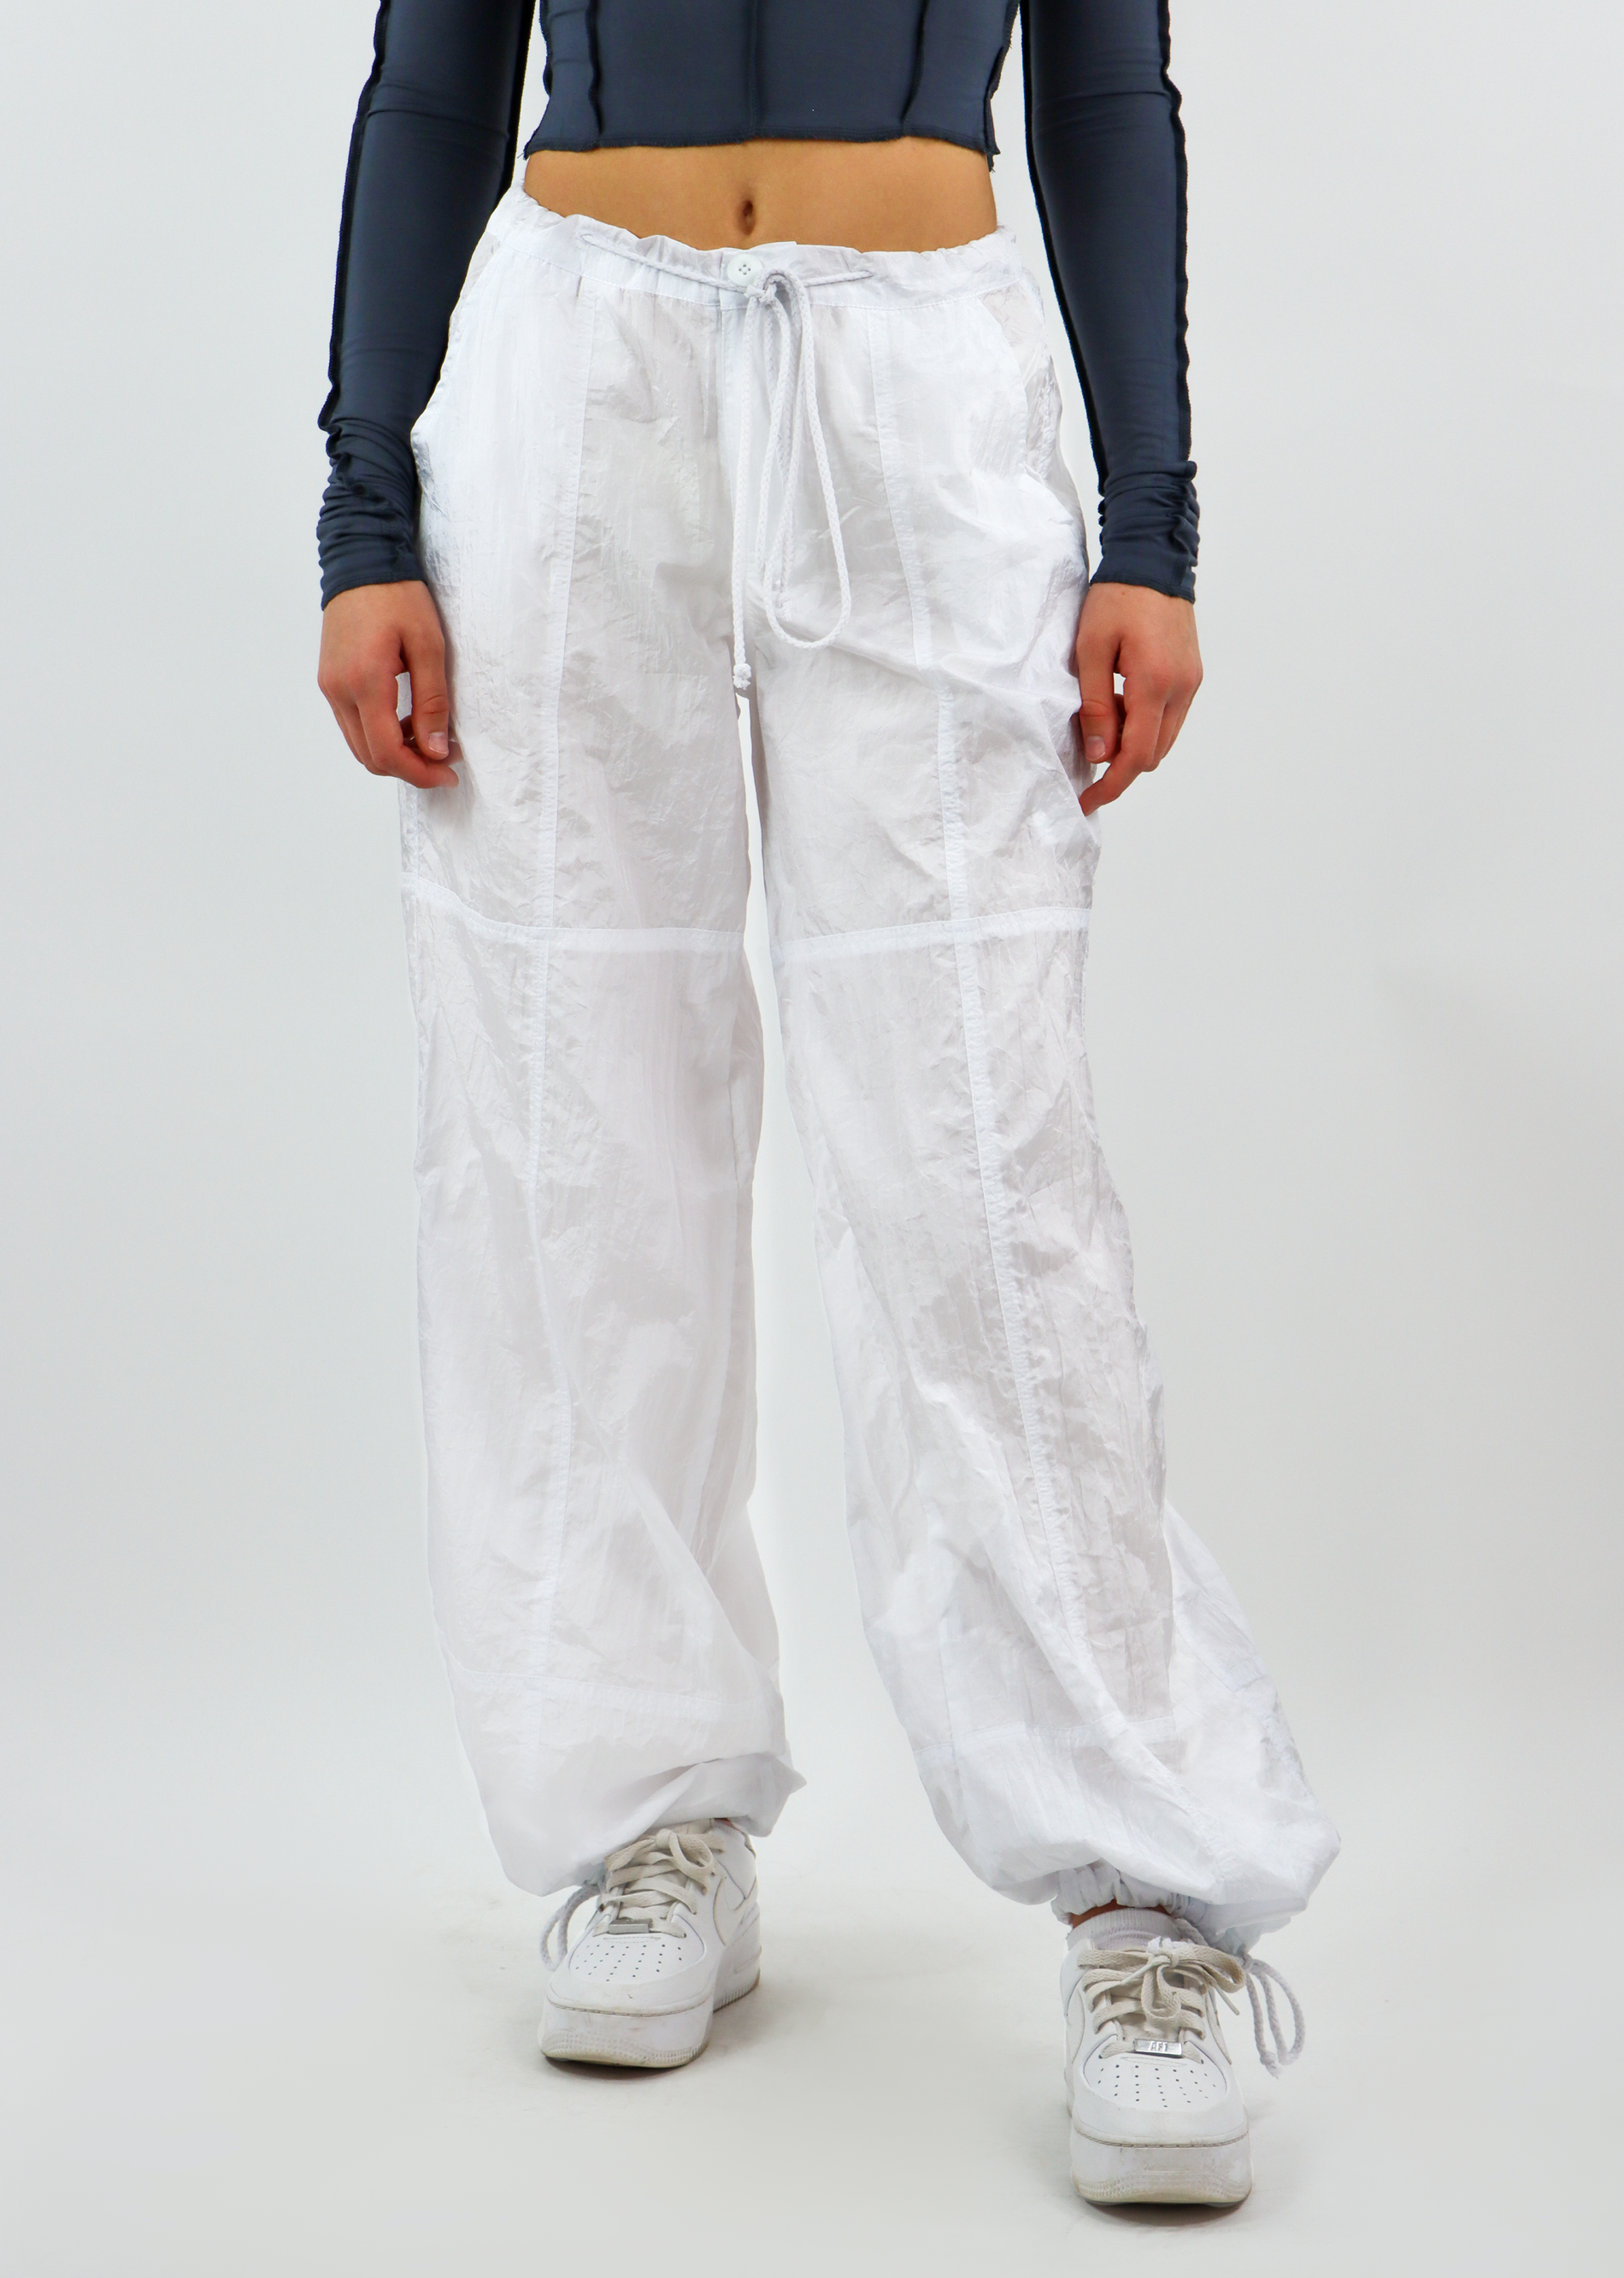 Ready To Fly Parachute Pants ☆ White